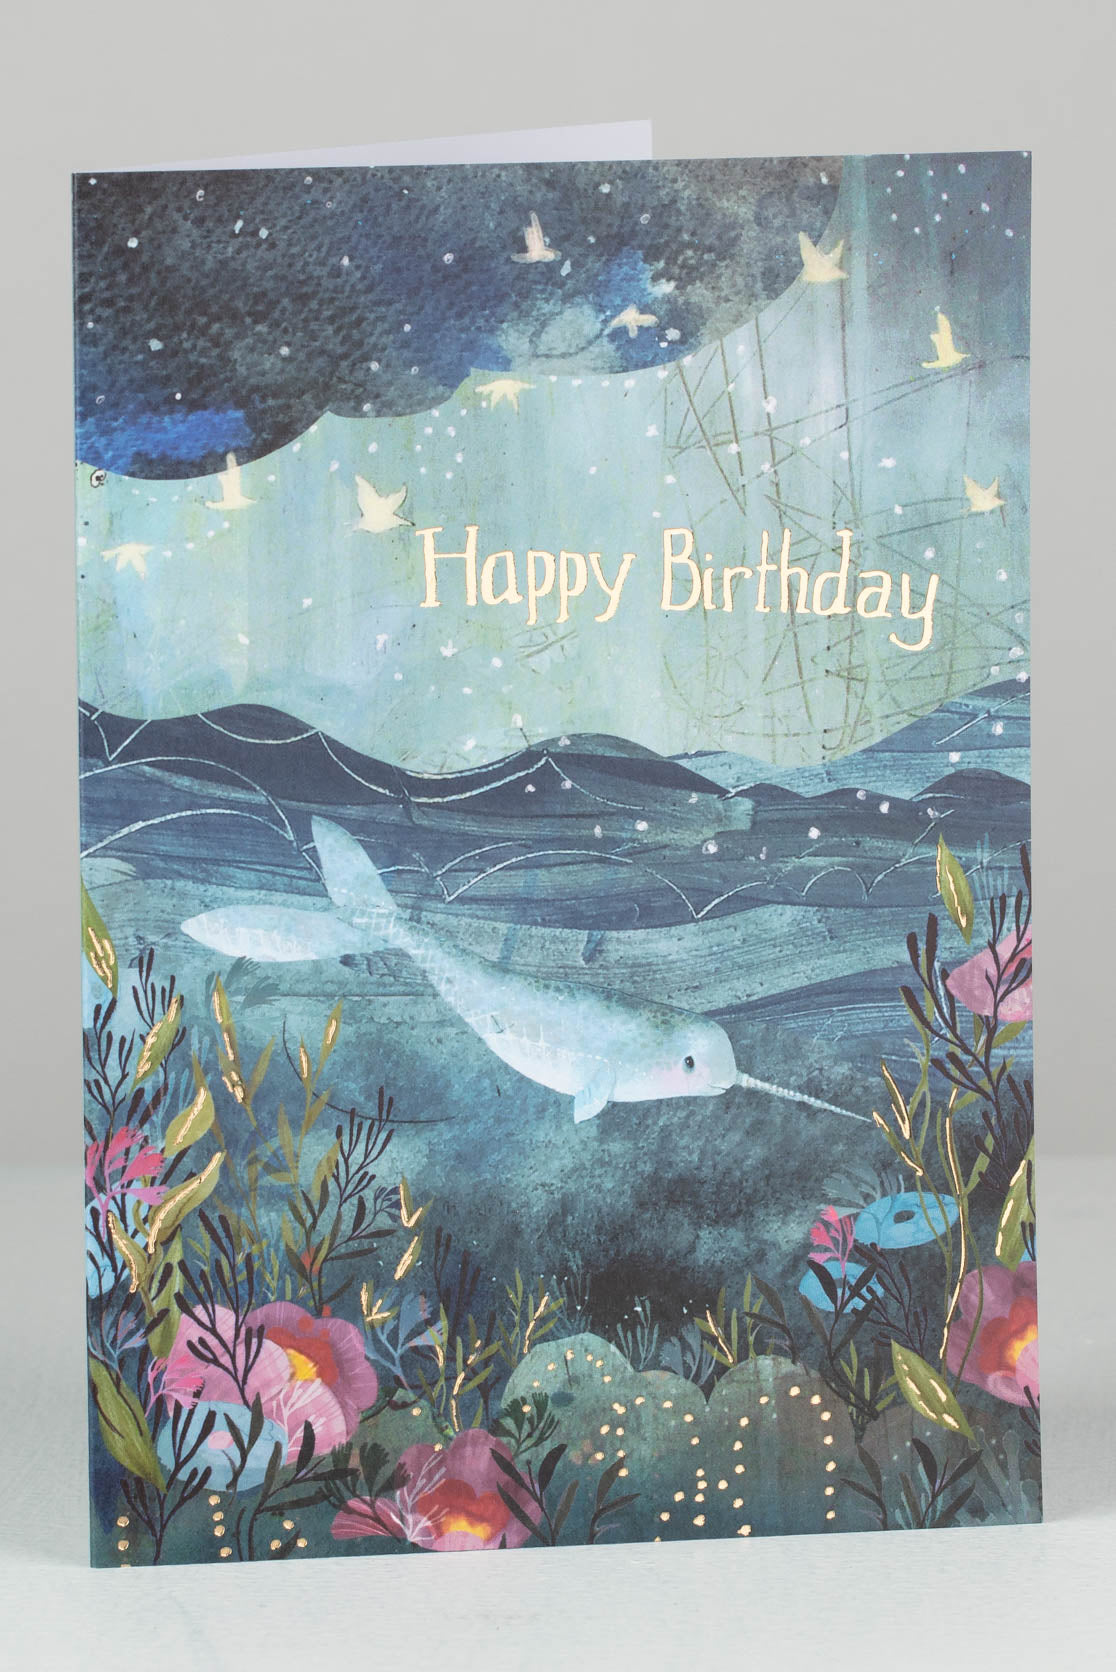 Birthday card showing narwhal in the ocean with seaweed